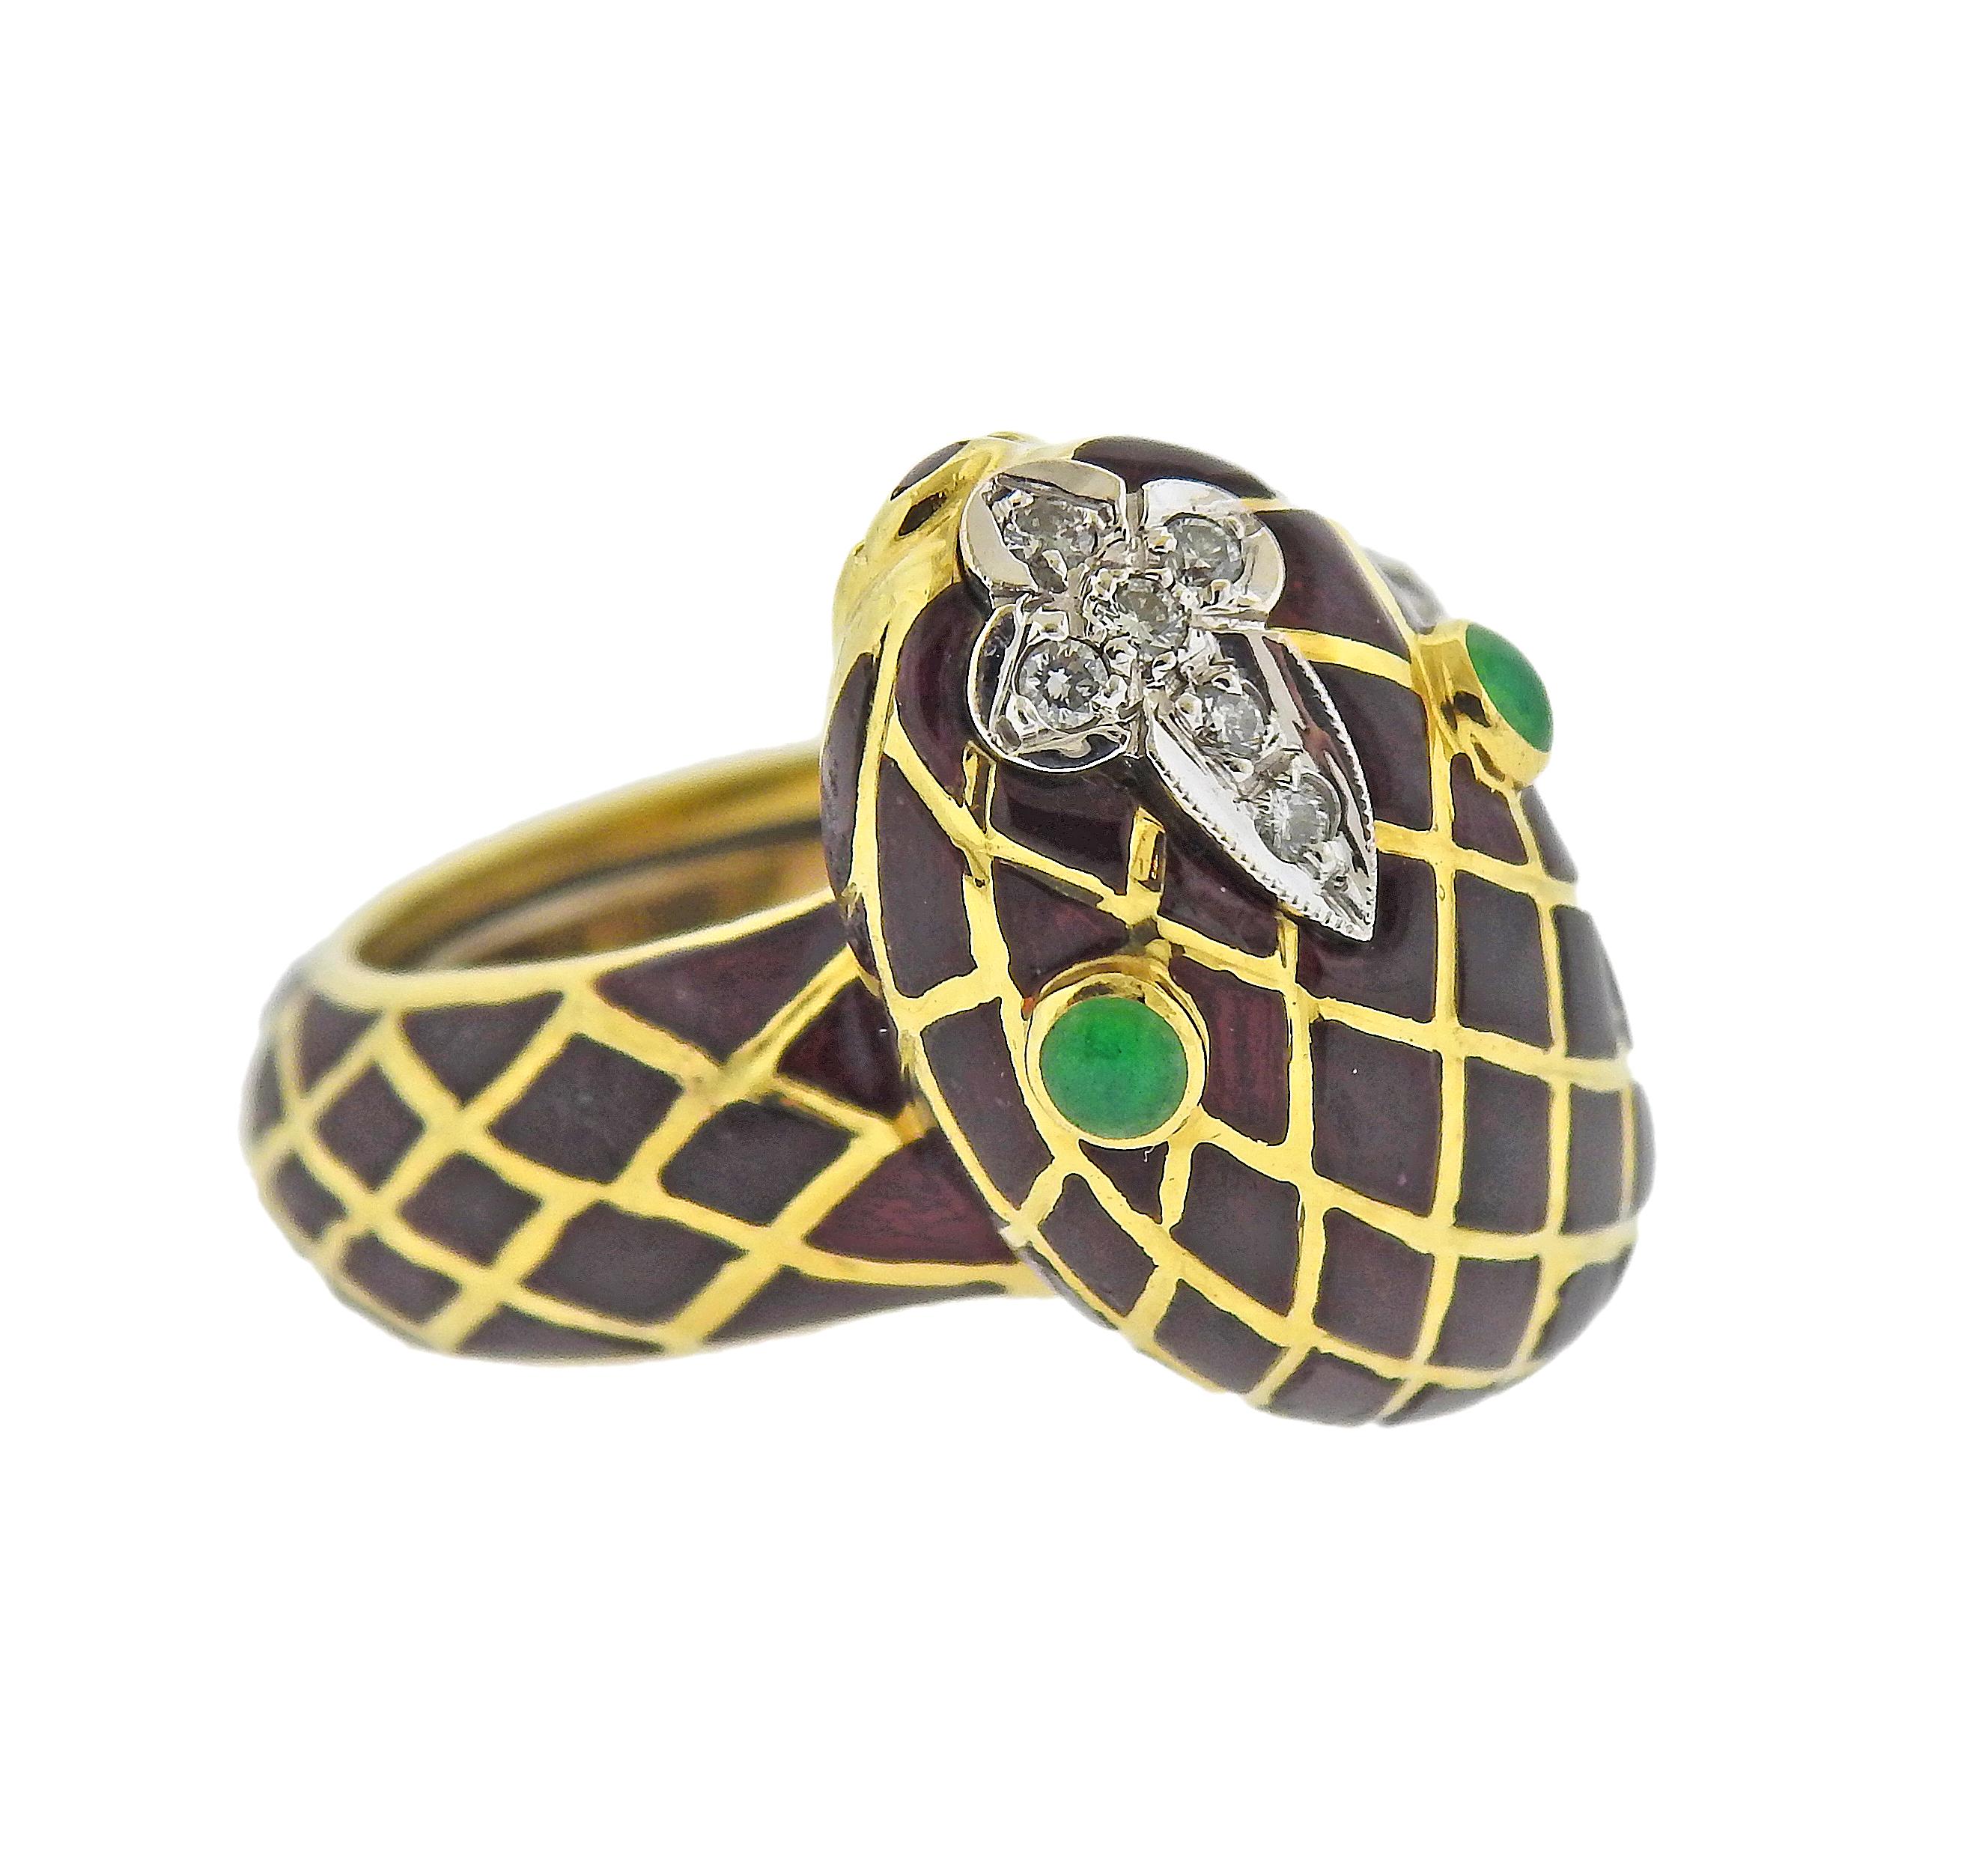 18k gold snake ring by David Webb, decorated with emerald eyes, approx. 0.24ctw in diamonds. Some abrasion on the enamel is present, particularly in the back of the ring. Ring size - 5.5, ring top - 20mm wide. marked: Webb, 18k. Weight - 18.9 grams.